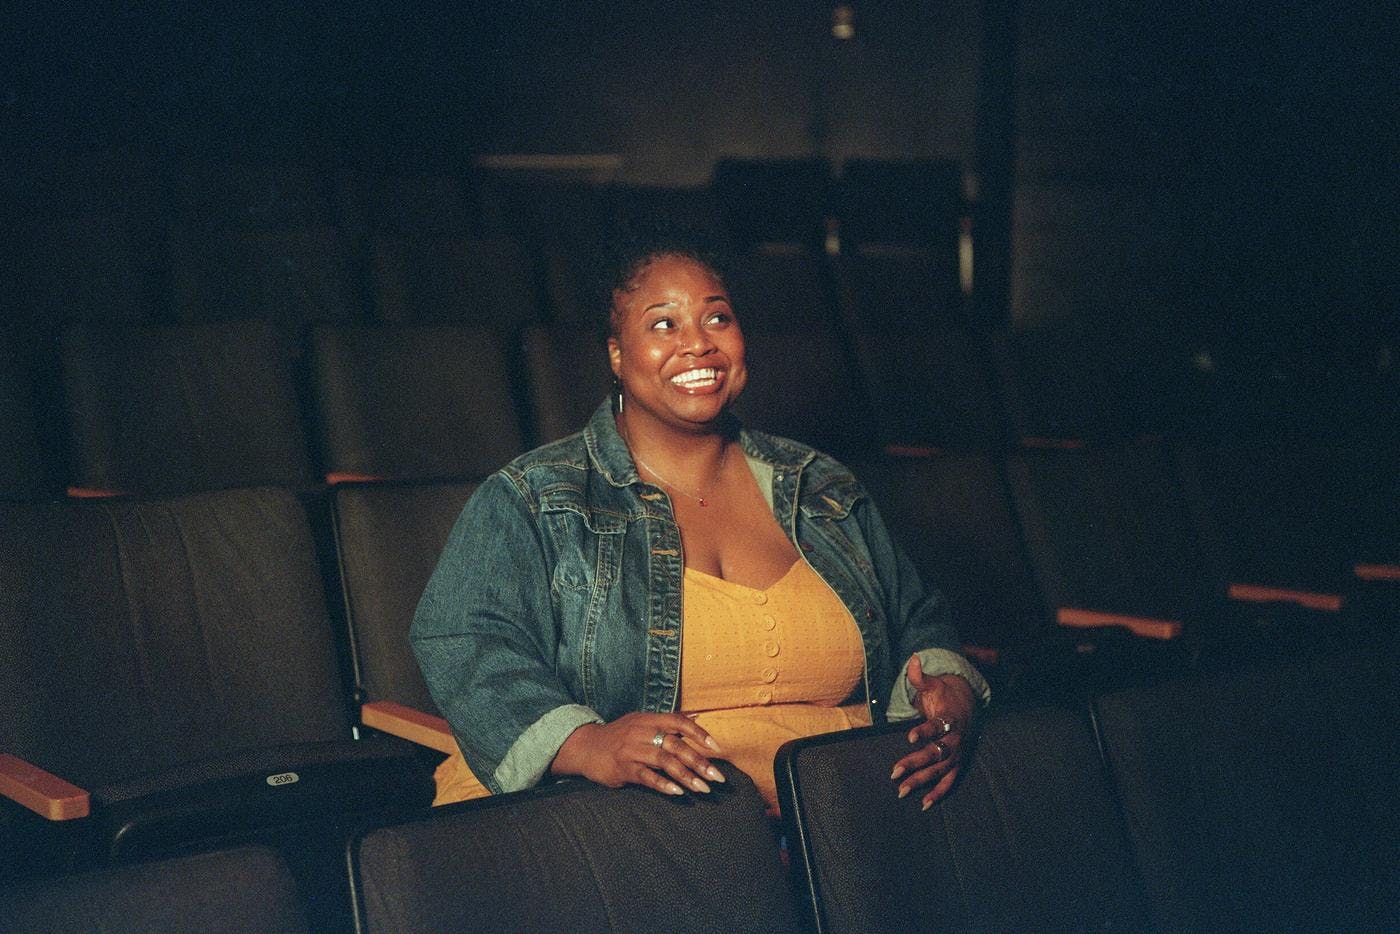 A woman sits alone in a theater, smiling broadly